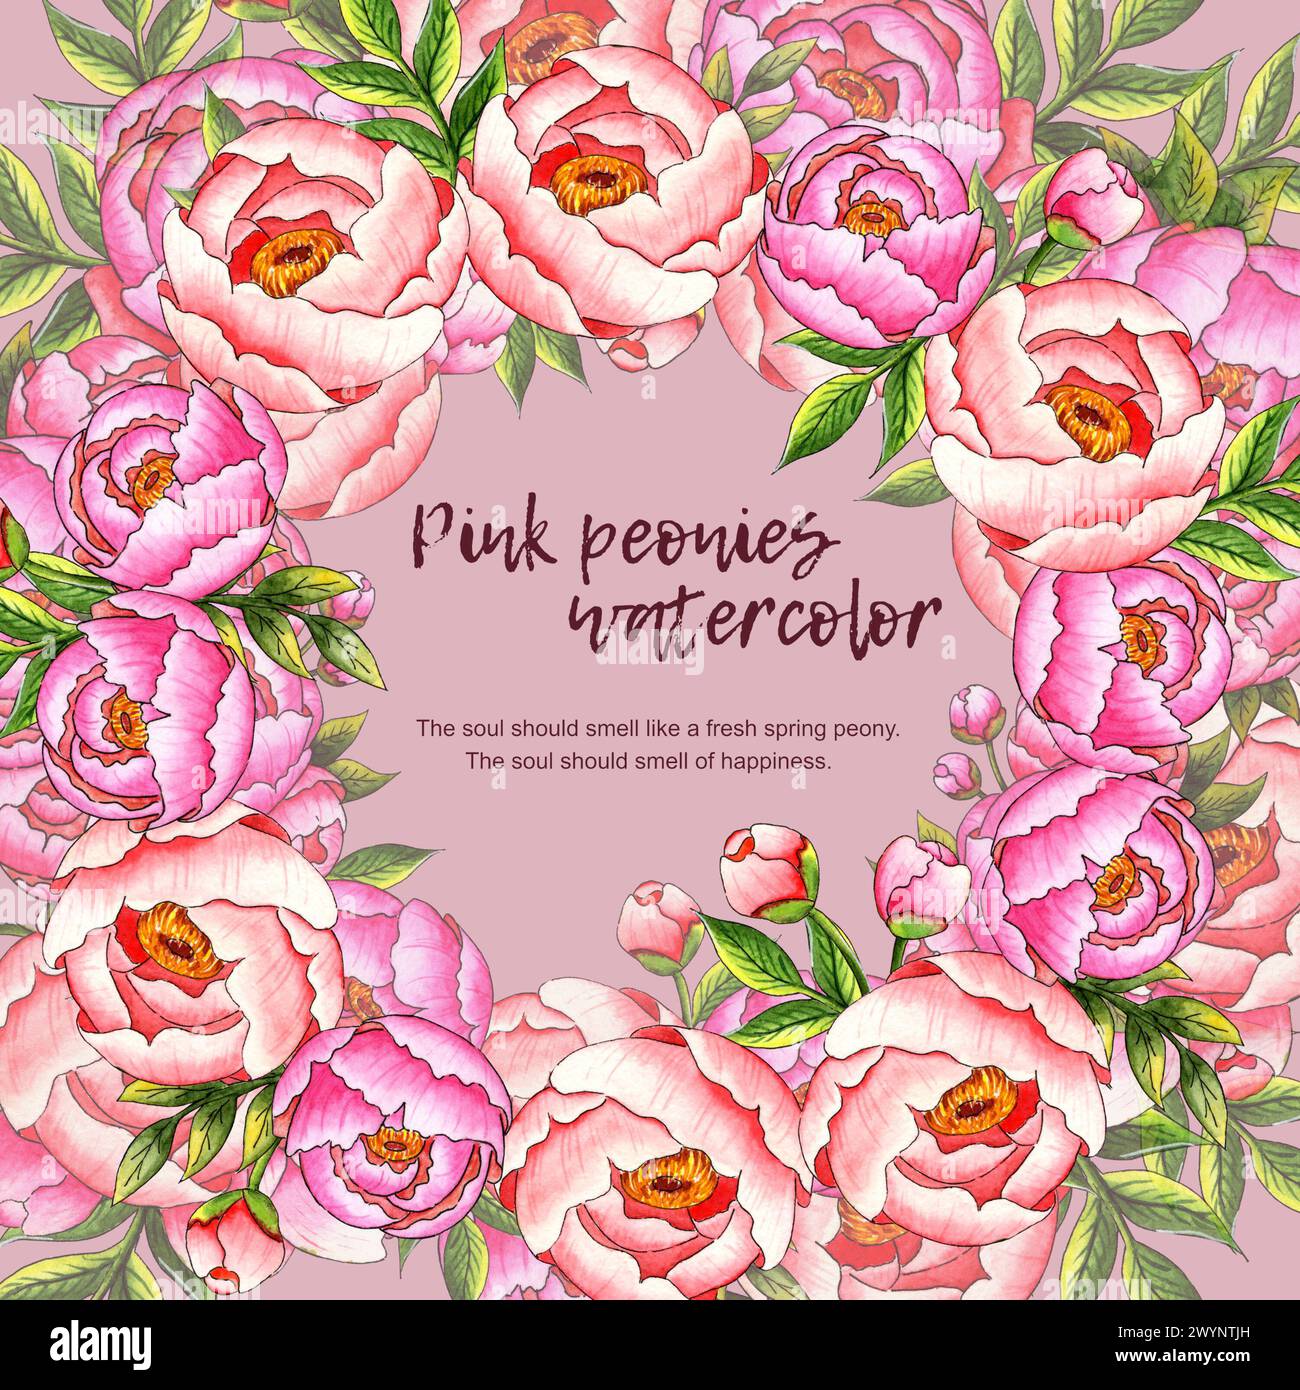 Watercolor illustration card with pink peonies, buds, leaves and text. Botanical composition on a dusty pink background. Great pattern for decor, stat Stock Photo